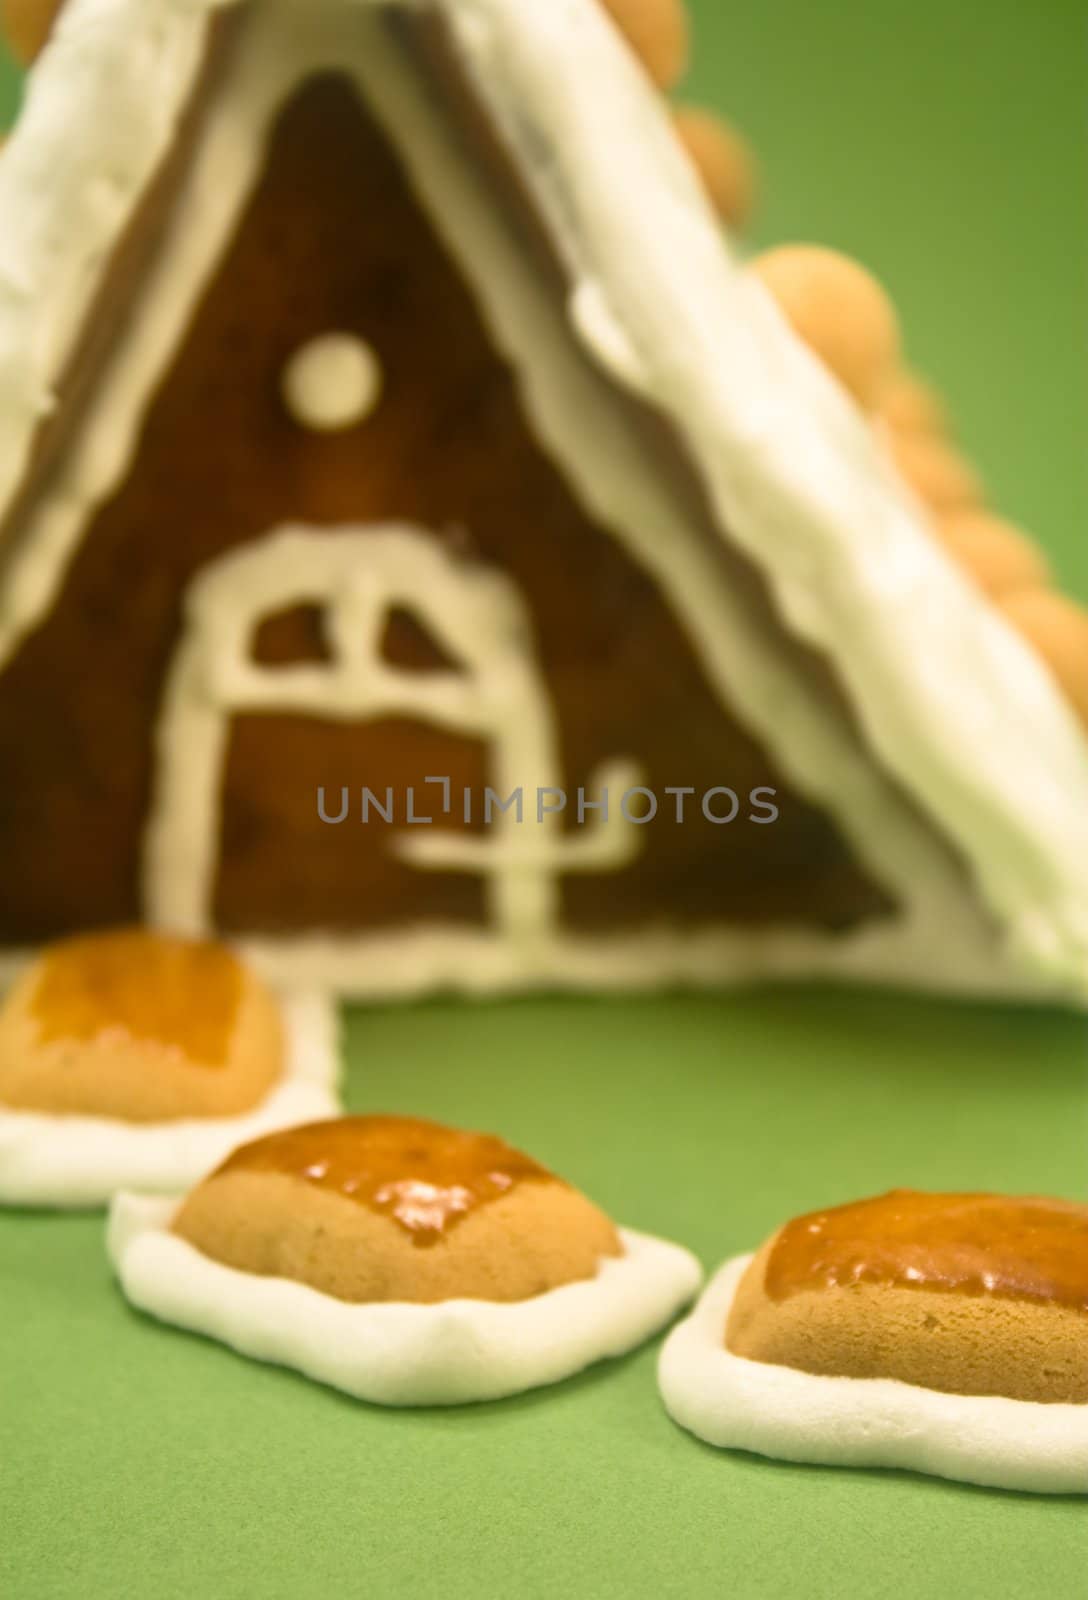 Gingerbread house by timscottrom